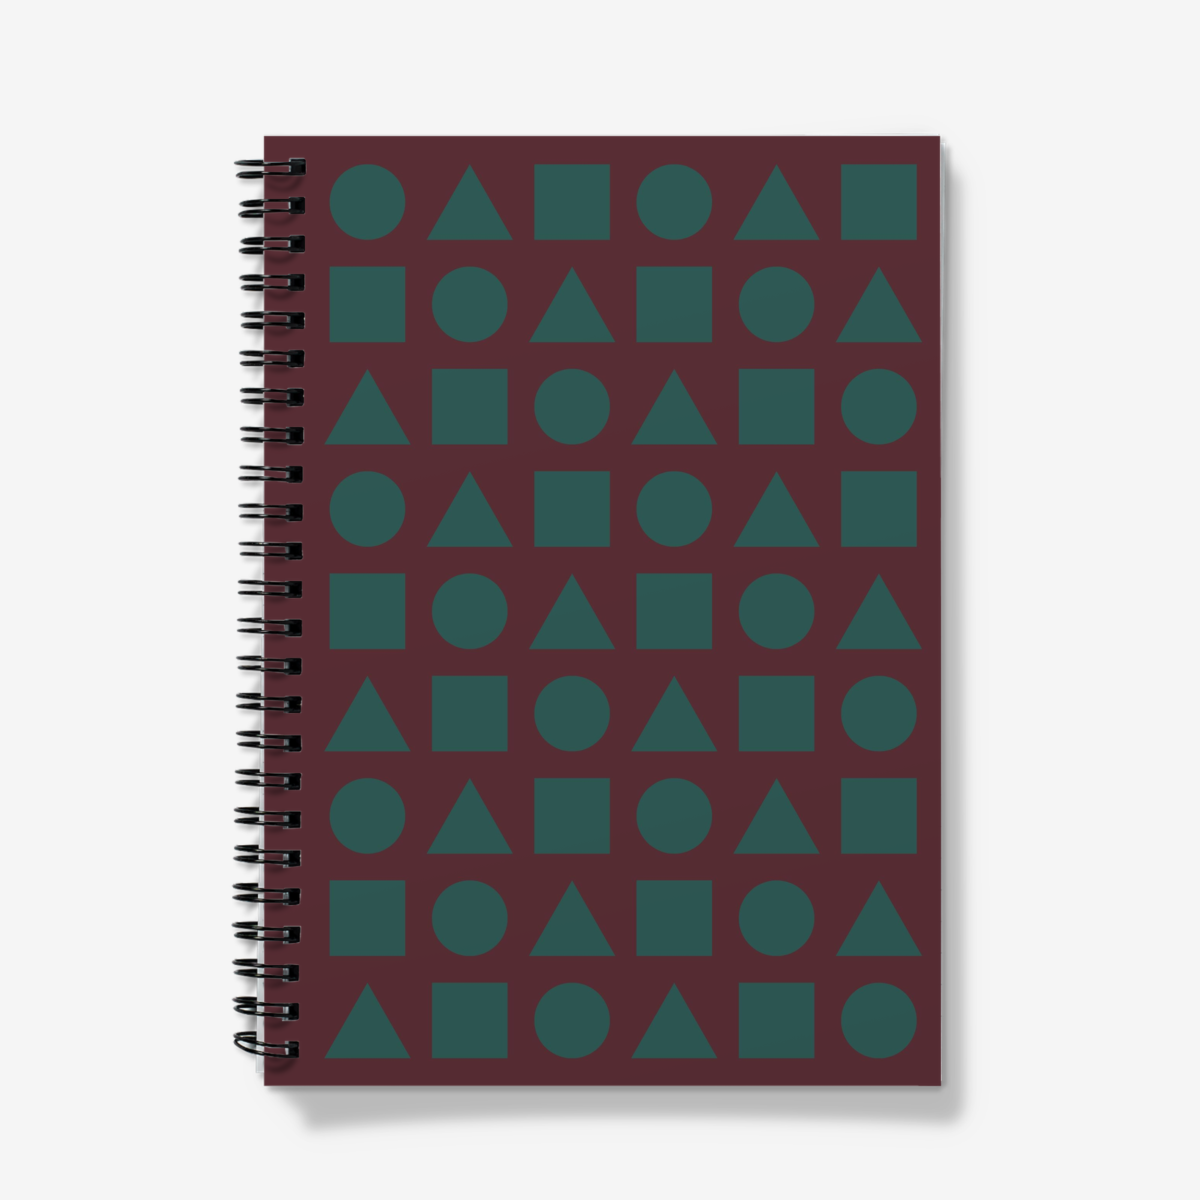 Green Shapes on Chocolate Brown Spiral Notebook